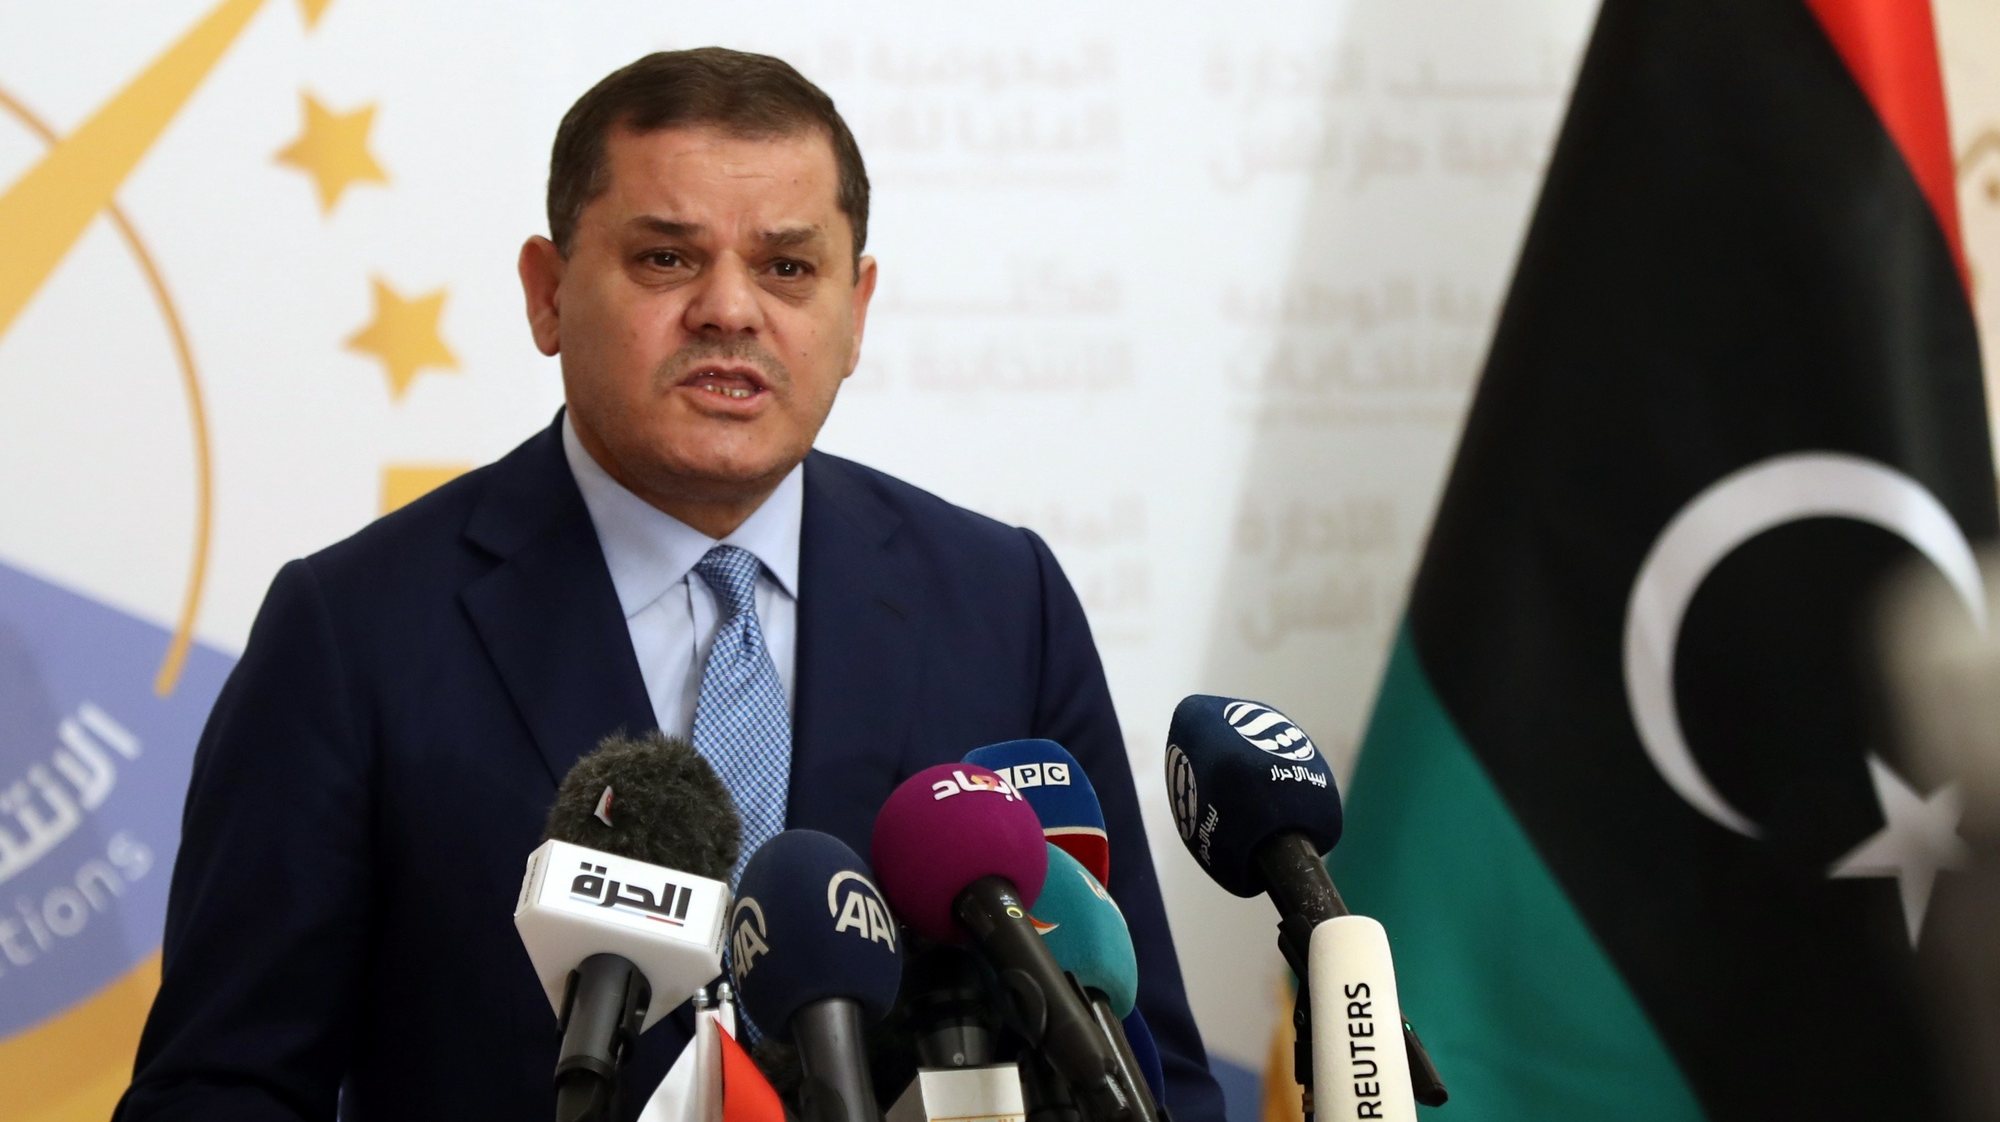 epa09596533 Libyan Prime Minister Abdul Hamid Dbeibah speaks after submitting his candidacy papers for the upcoming presidential election at the headquarters of the electoral commission in Tripoli, Libya, 21 November 2021.  EPA/STR